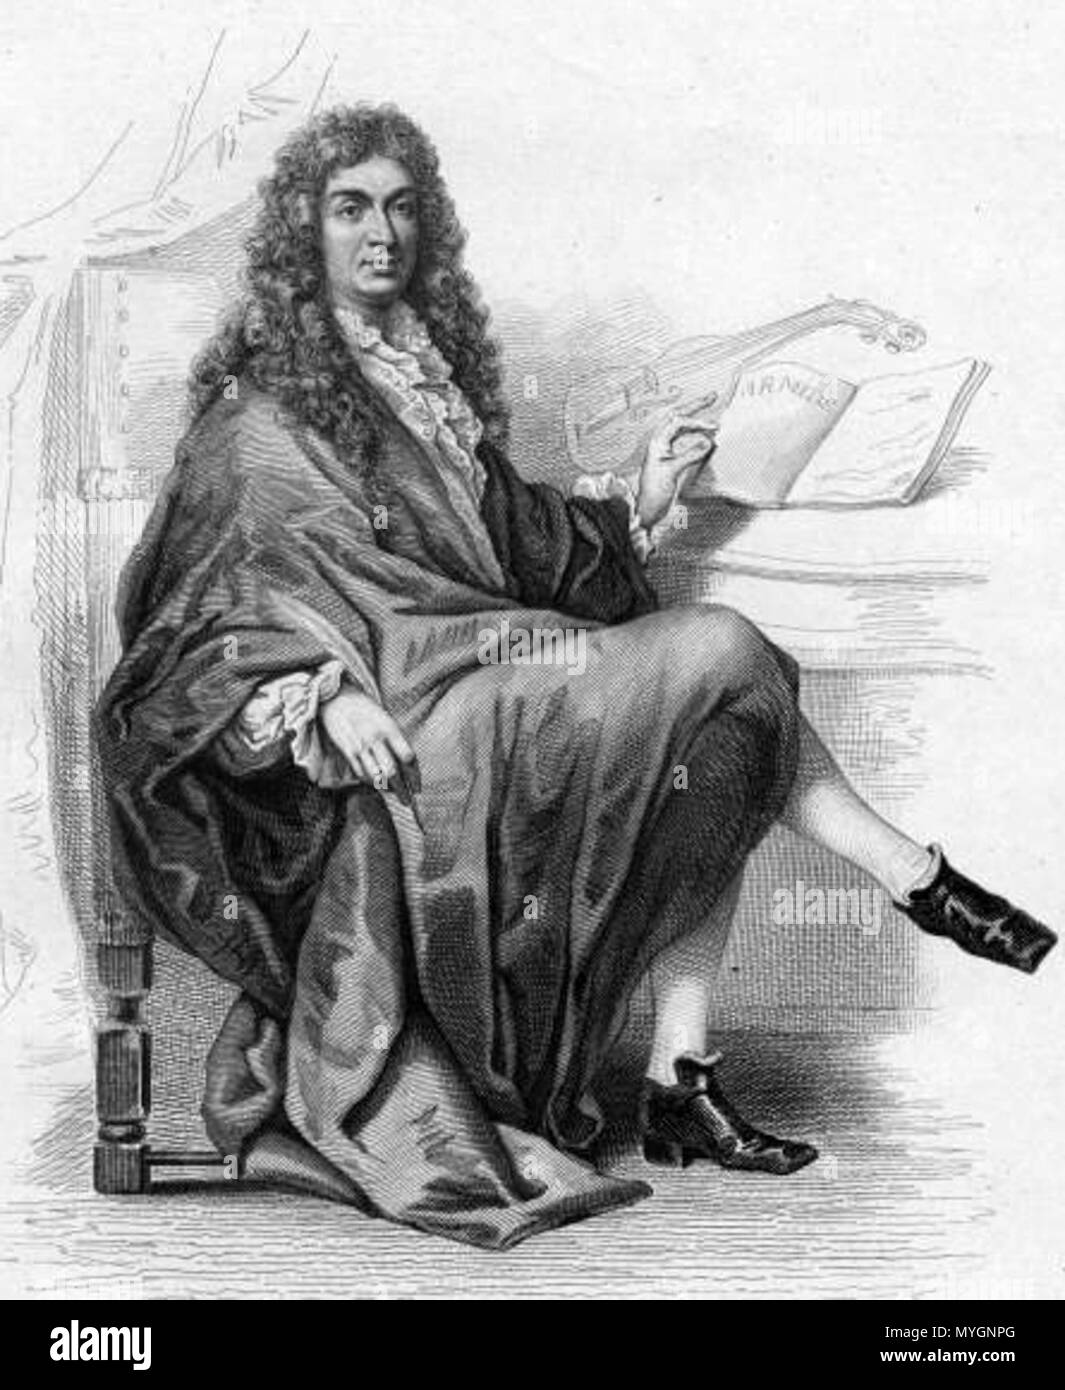 . English: Jean-Baptiste Lully (1632-1687) after a drawing by Tony Johannot (1803-1852). 19th century. Unidentified engraver after Tony Johannot 272 Jean-Baptiste Lully after Tony Johannot Stock Photo